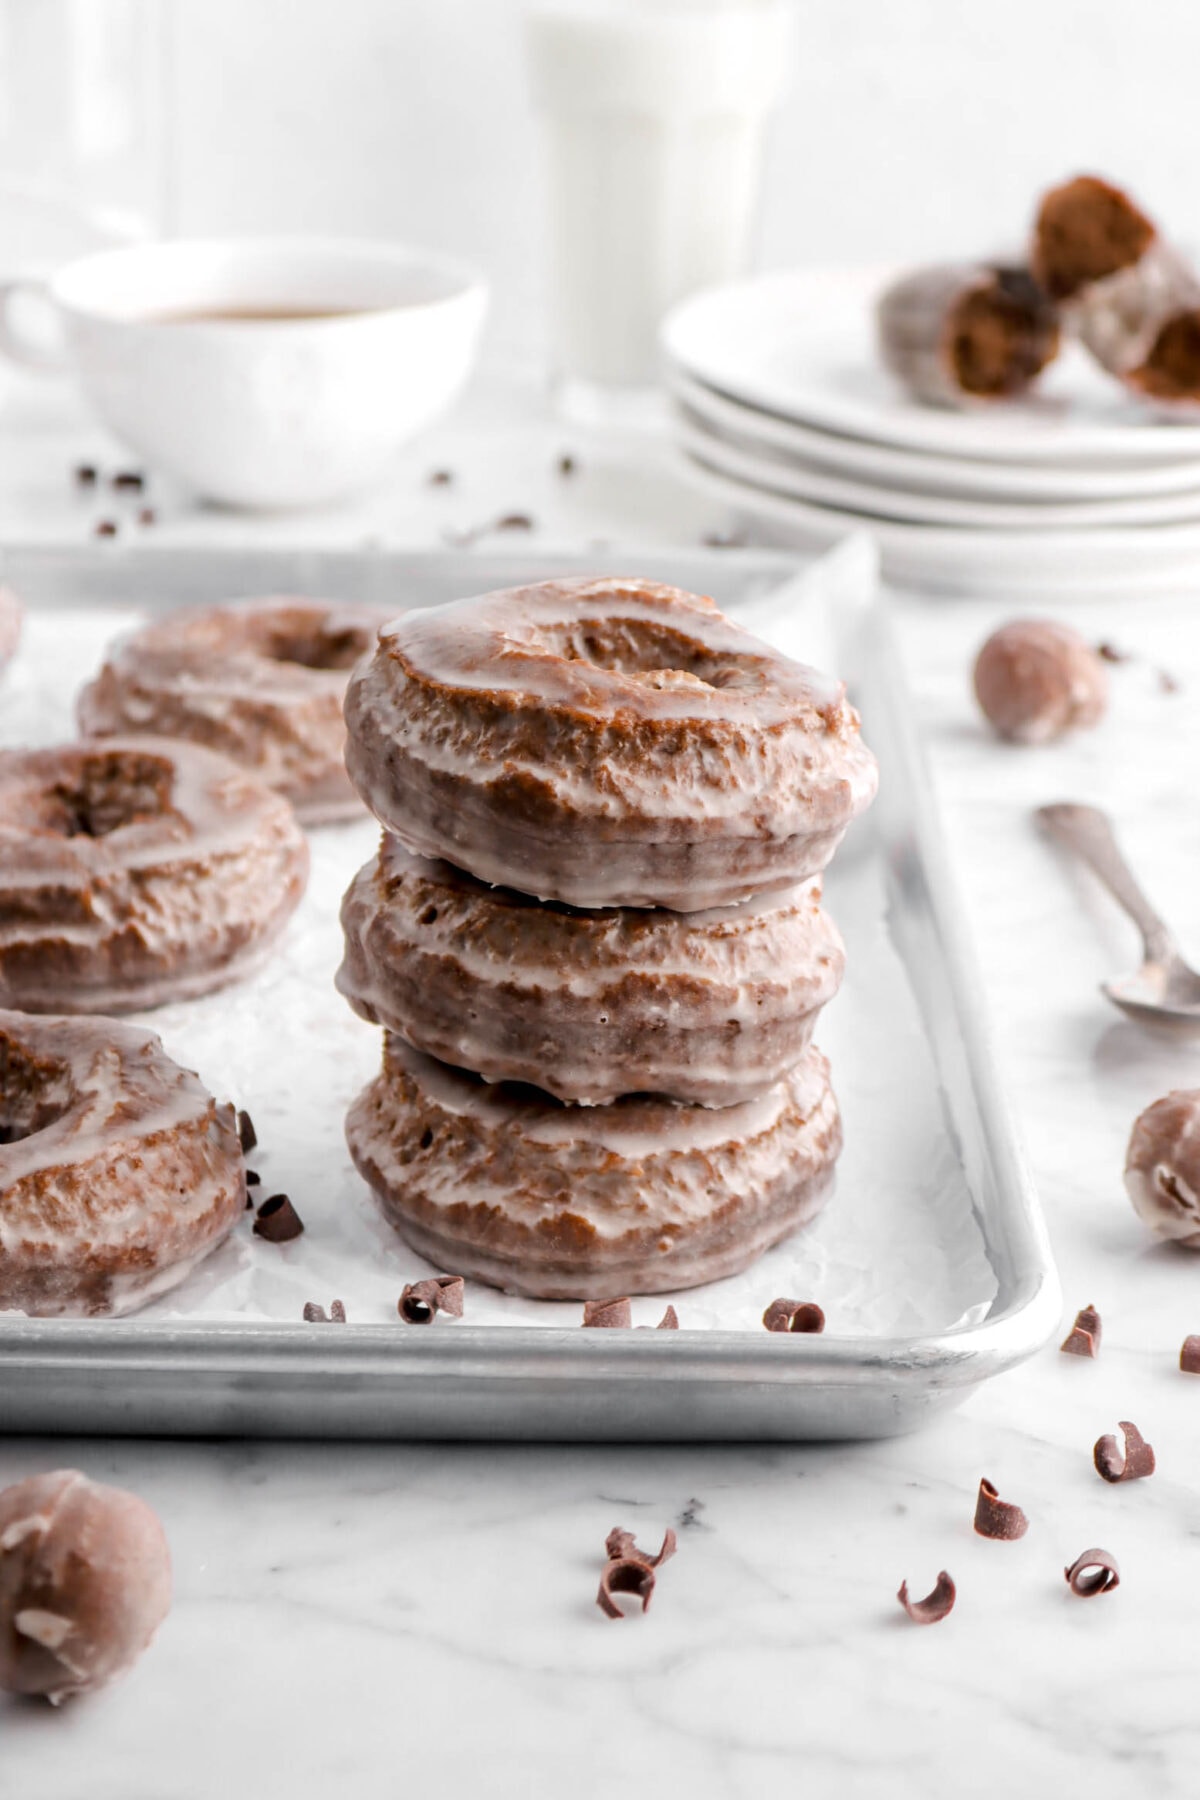 three stacked chocolate doughnuts on sheet pan with mug of coffee, glass of milk, and a broken doughnut behind on stacked plates